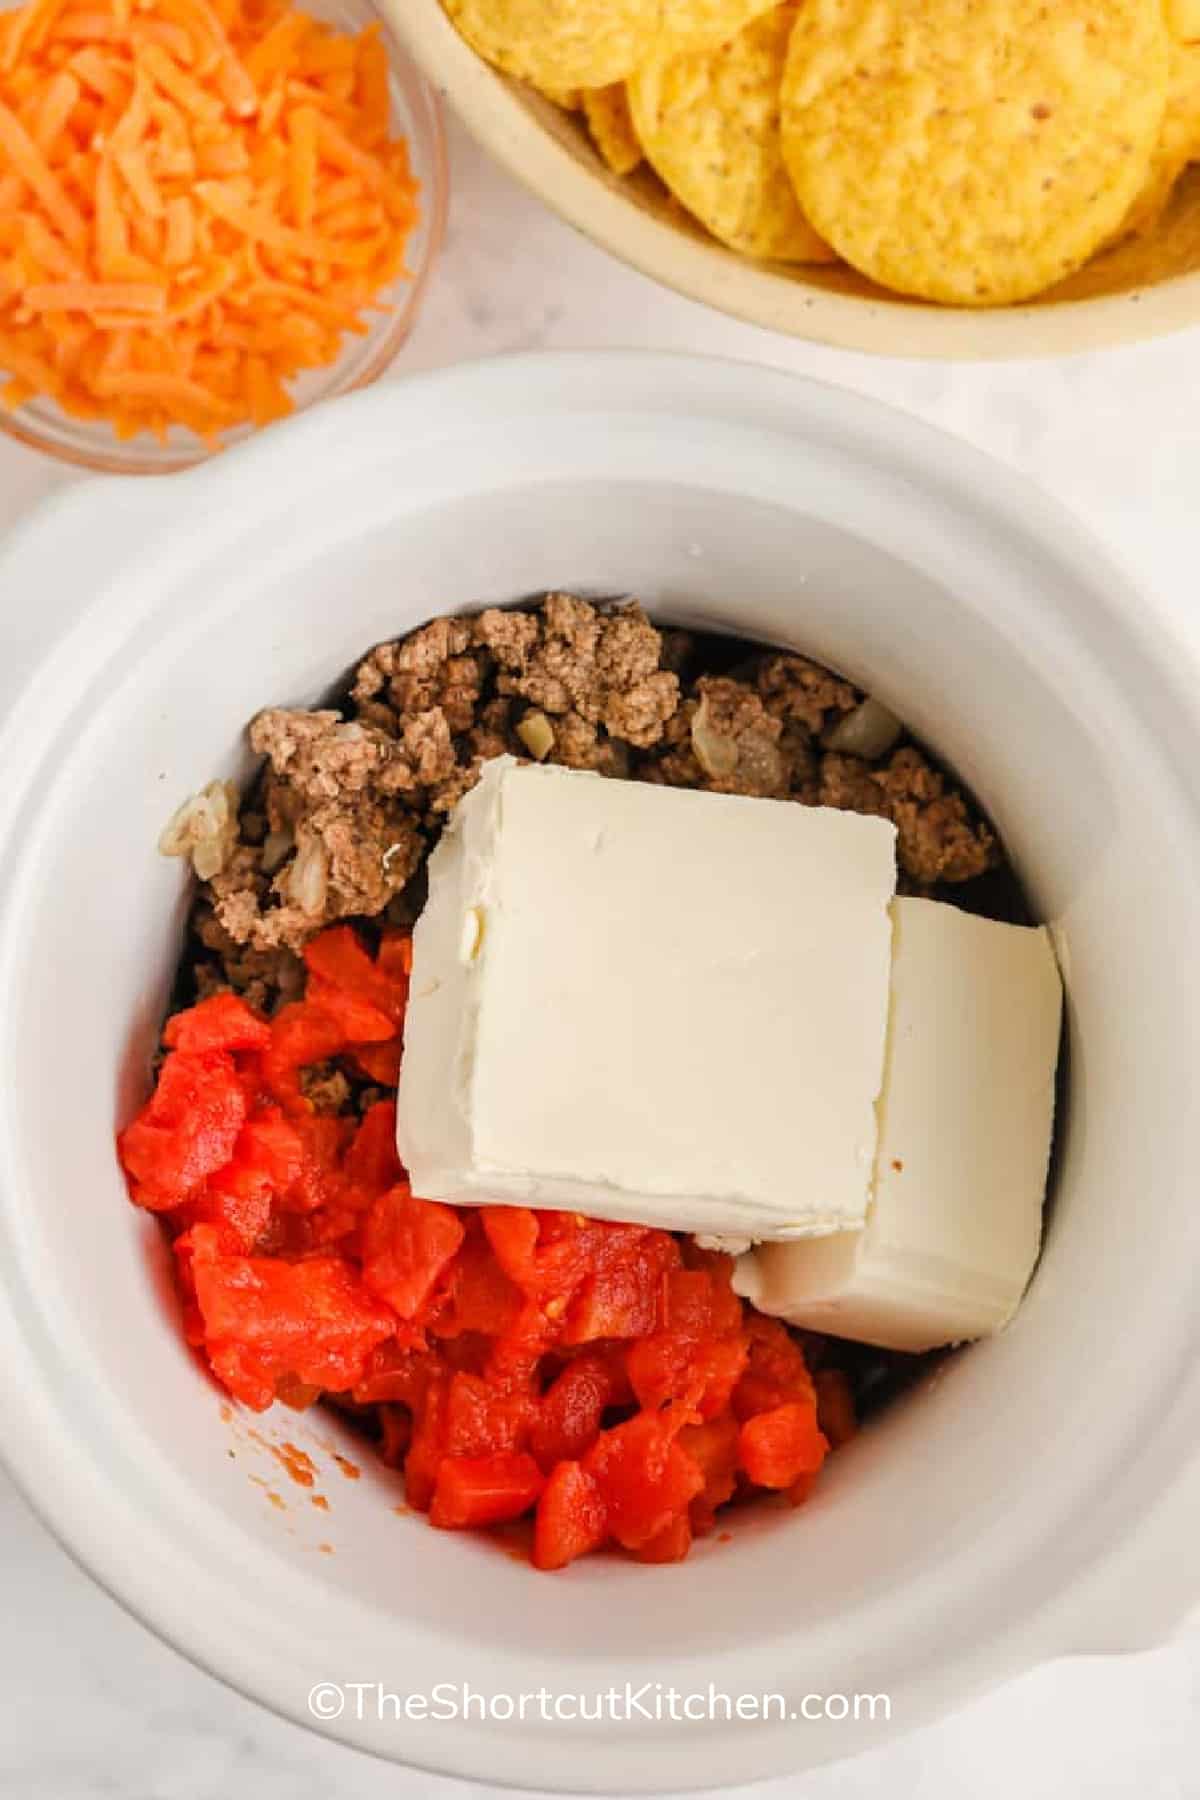 Ingredients to make this cream cheese Rotel dip recipe in a small Crockpot